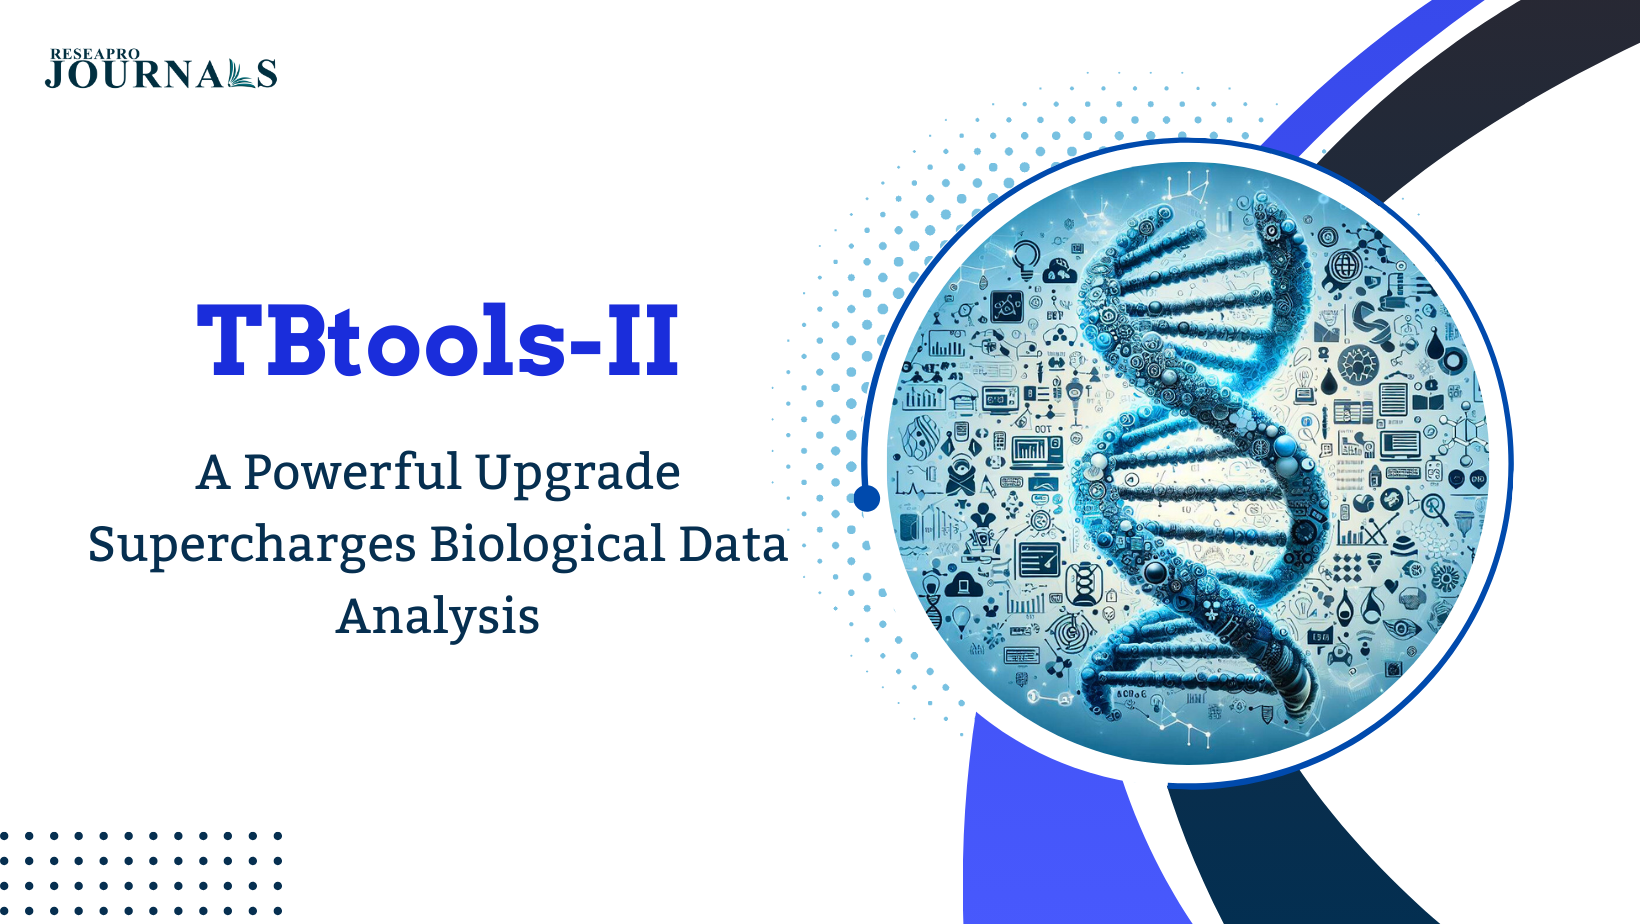 TBtools-II: A Powerful Upgrade Supercharges Biological Data Analysis